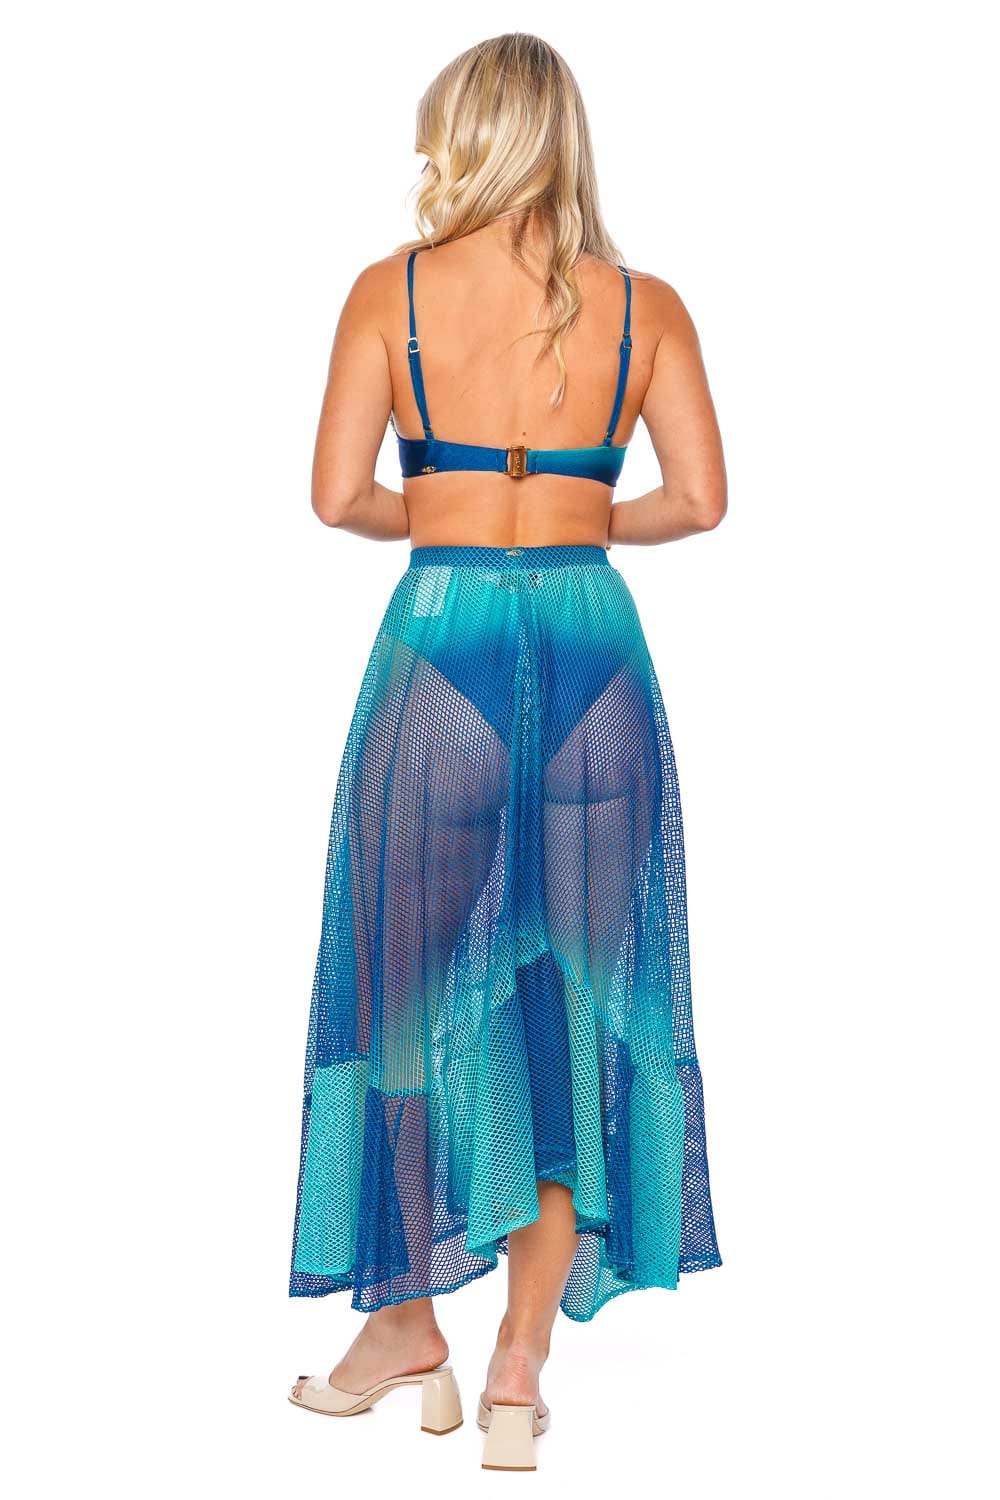 PatBO Ombre High Tide Netted Beach Skirt